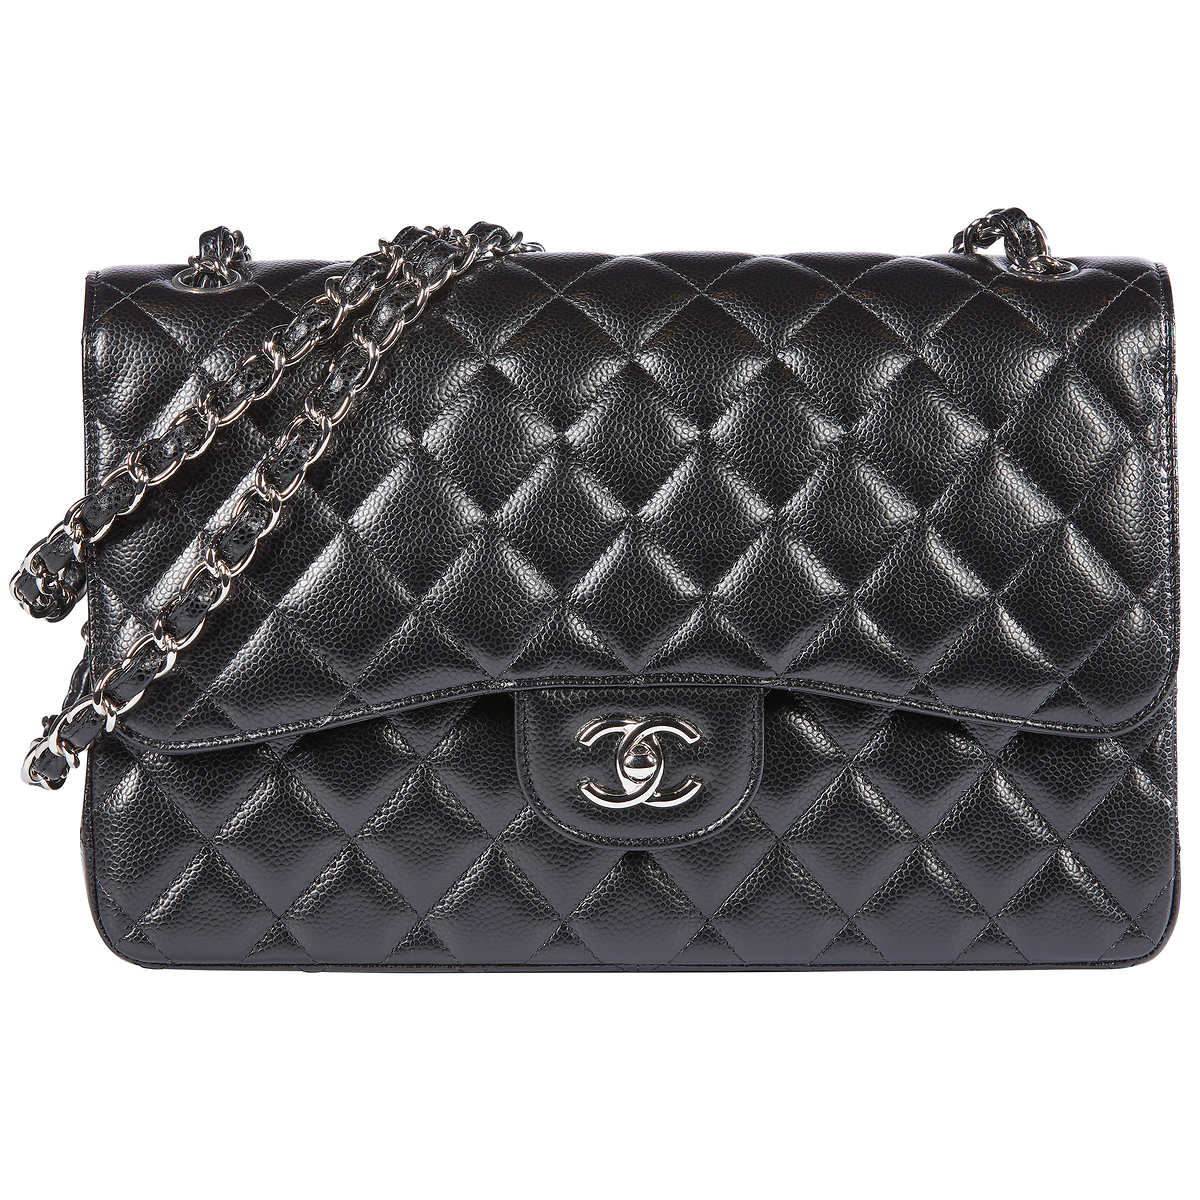 Chanel Silver Quilted Leather IPad Case Chanel